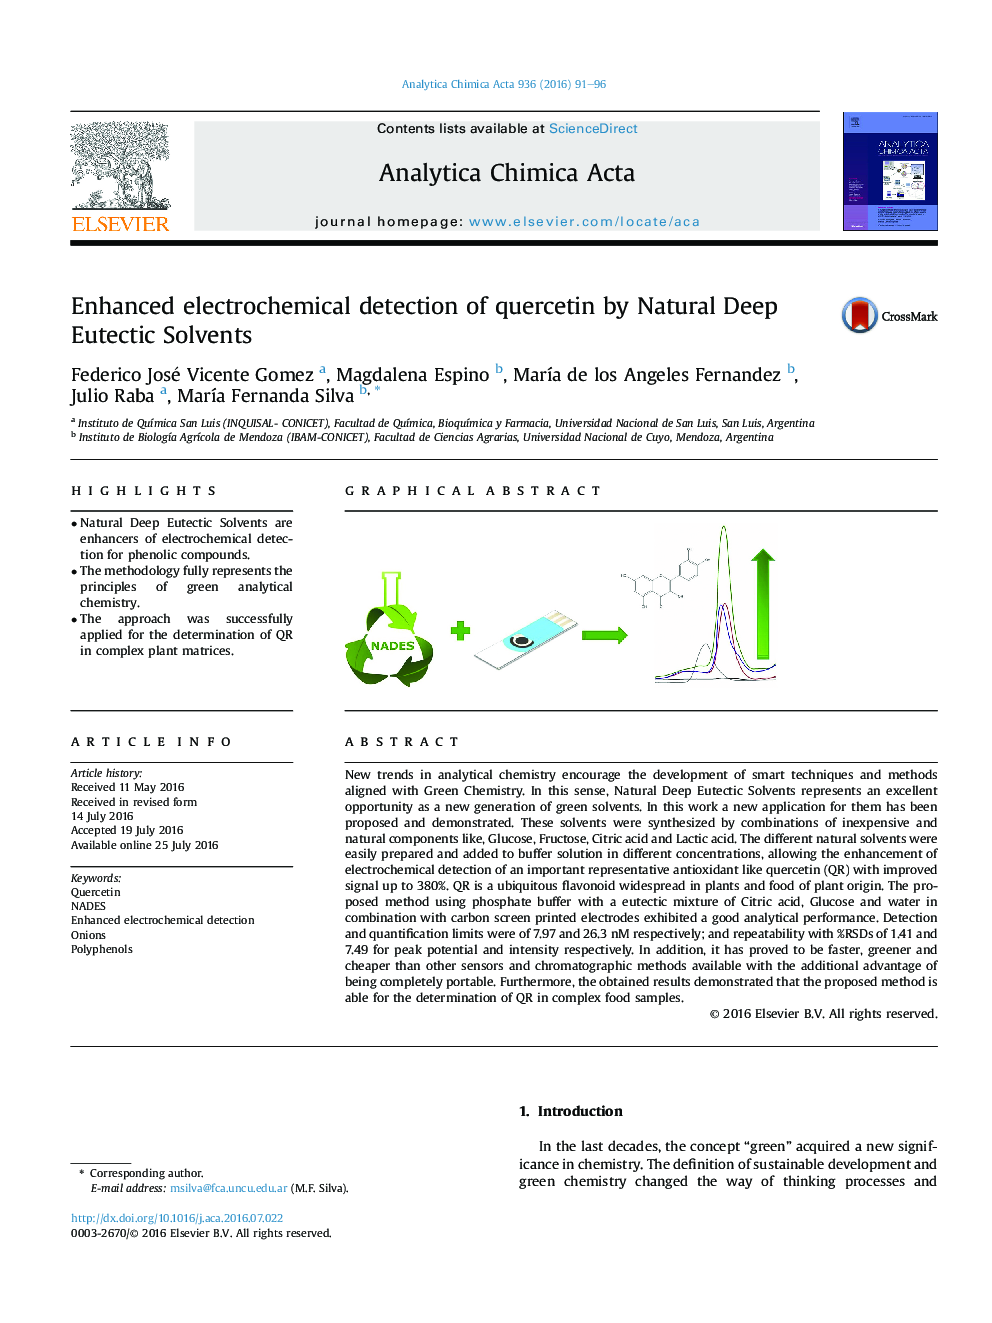 Enhanced electrochemical detection of quercetin by Natural Deep Eutectic Solvents